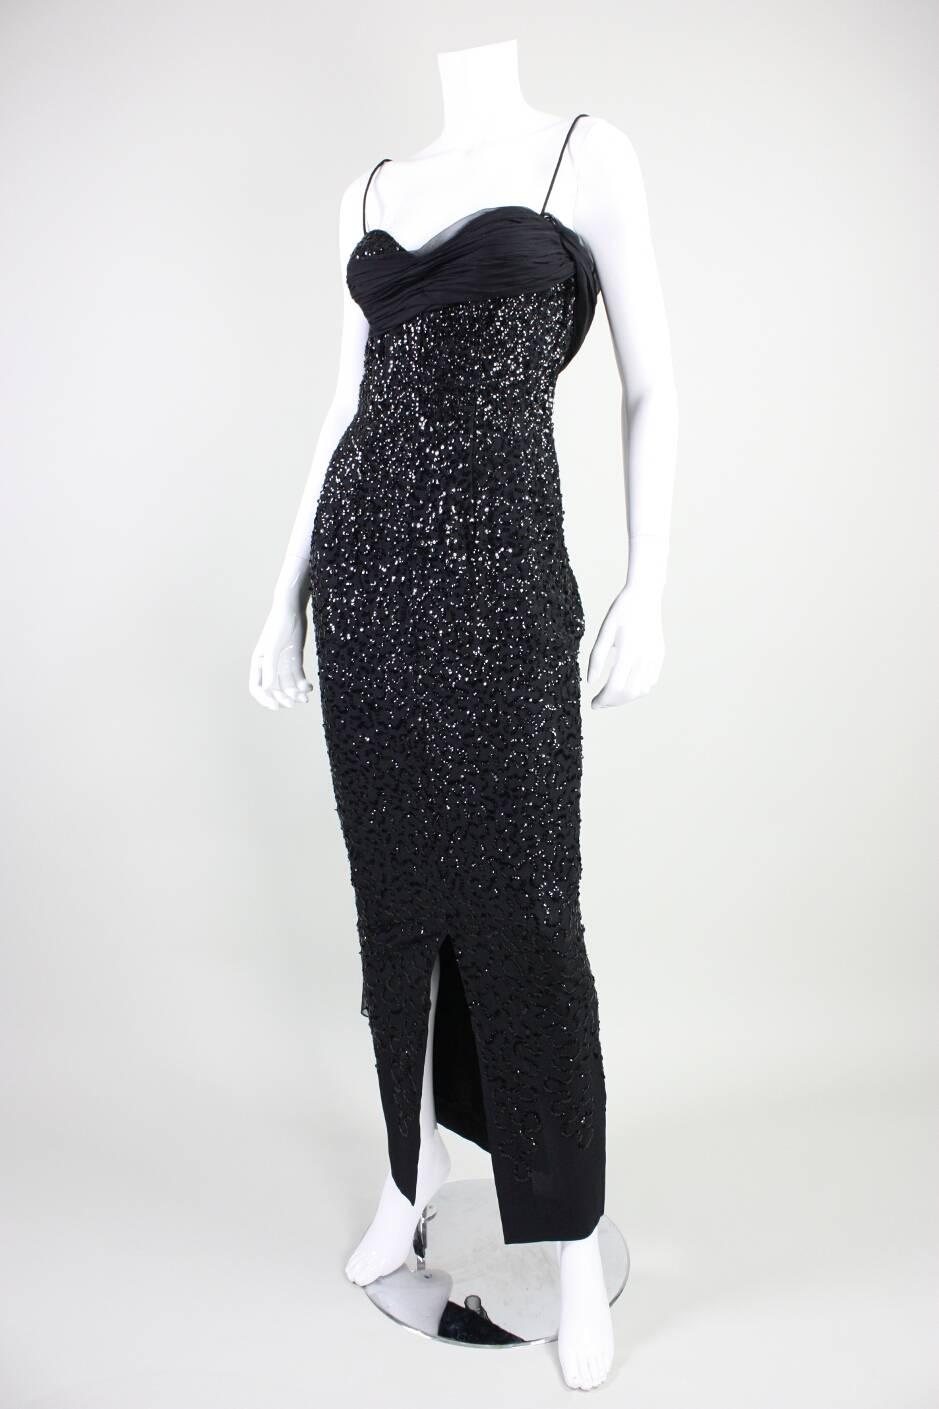 Vintage gown from Frank Starr likely dates to the late 1950’s to early 1960’s and is made of black crepe with black sequins sewn in a squiggle pattern that diminishes in density from top to bottom.  Gathered black chiffon band starts at right